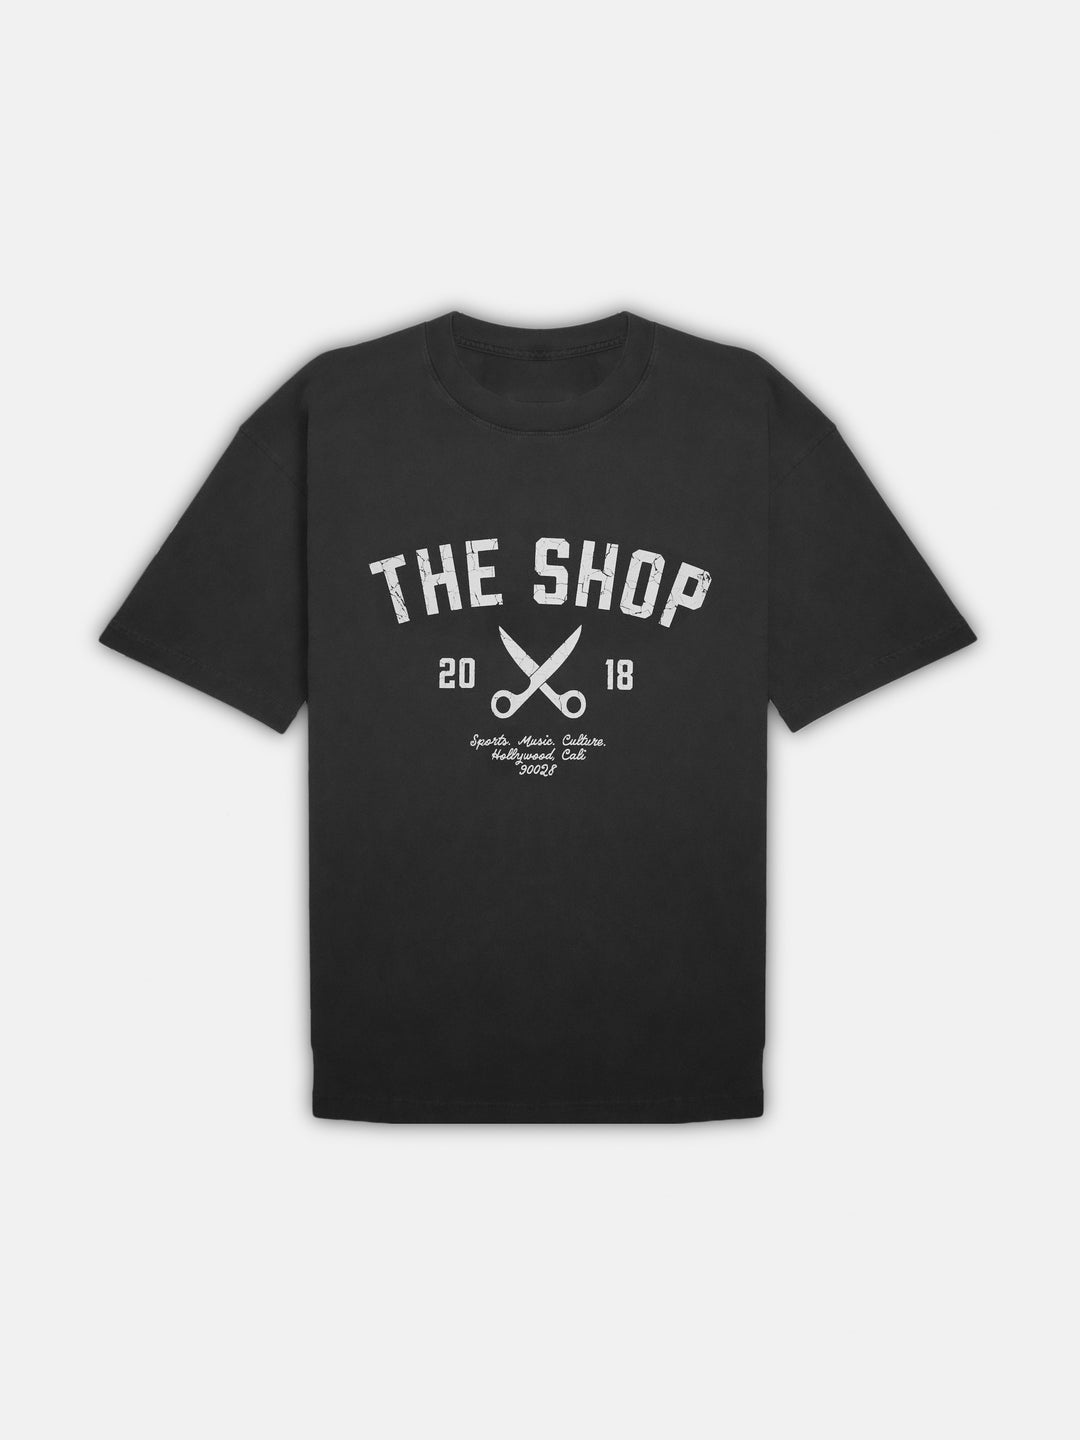 The Shop: S5E8 Gameday Tee Vintage Black - Front